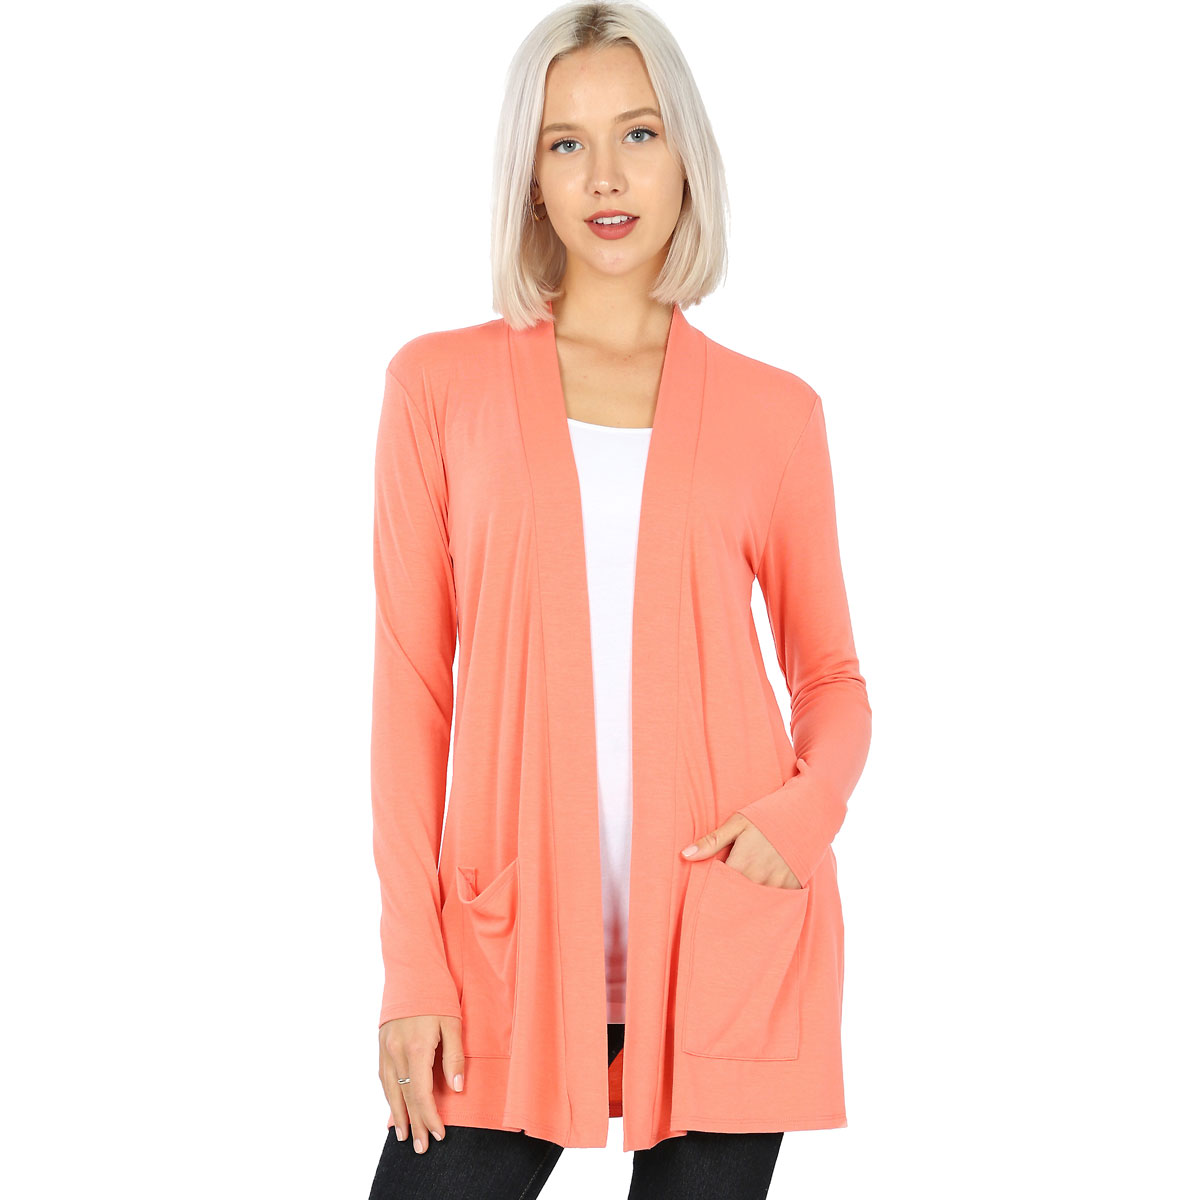 DEEP CORAL Slouchy Pocket Open Cardigan 1443 